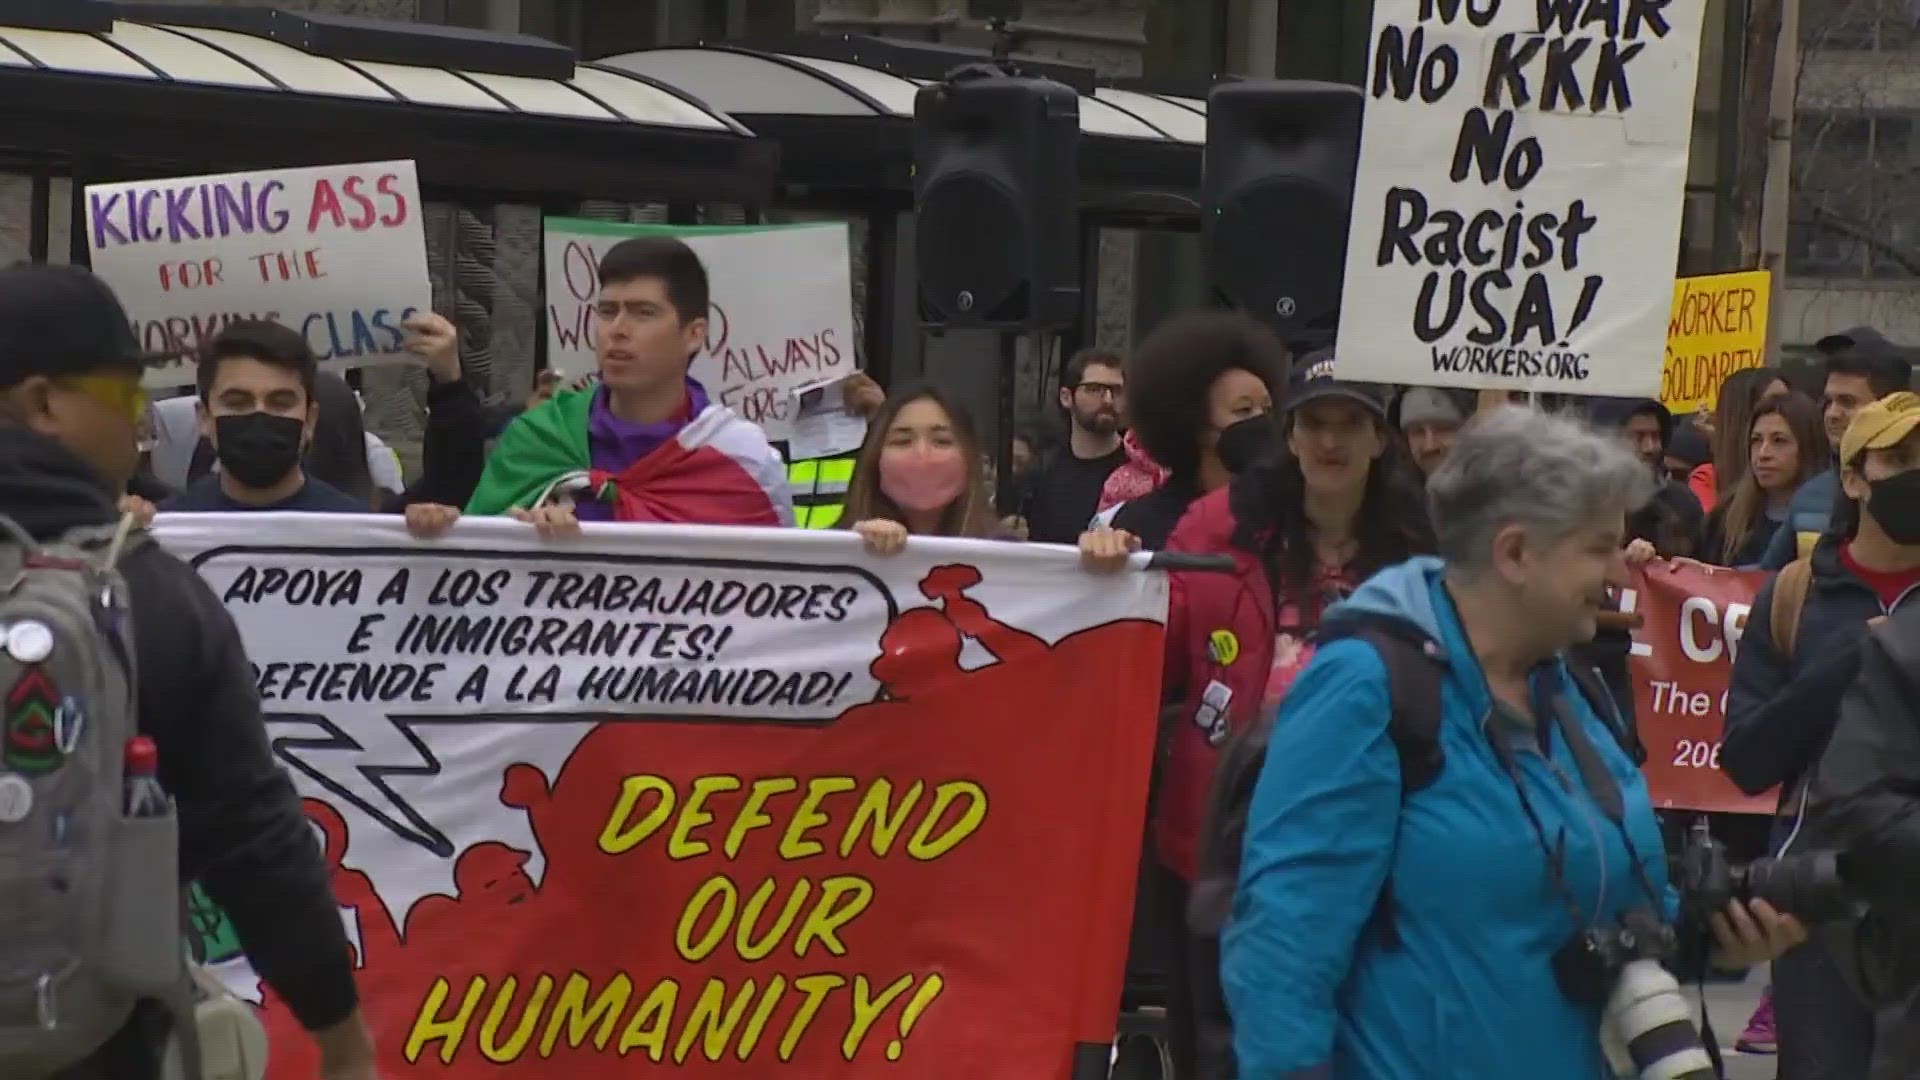 Demonstrators marched through downtown Seattle in support of worker and immigrant rights on May Day.